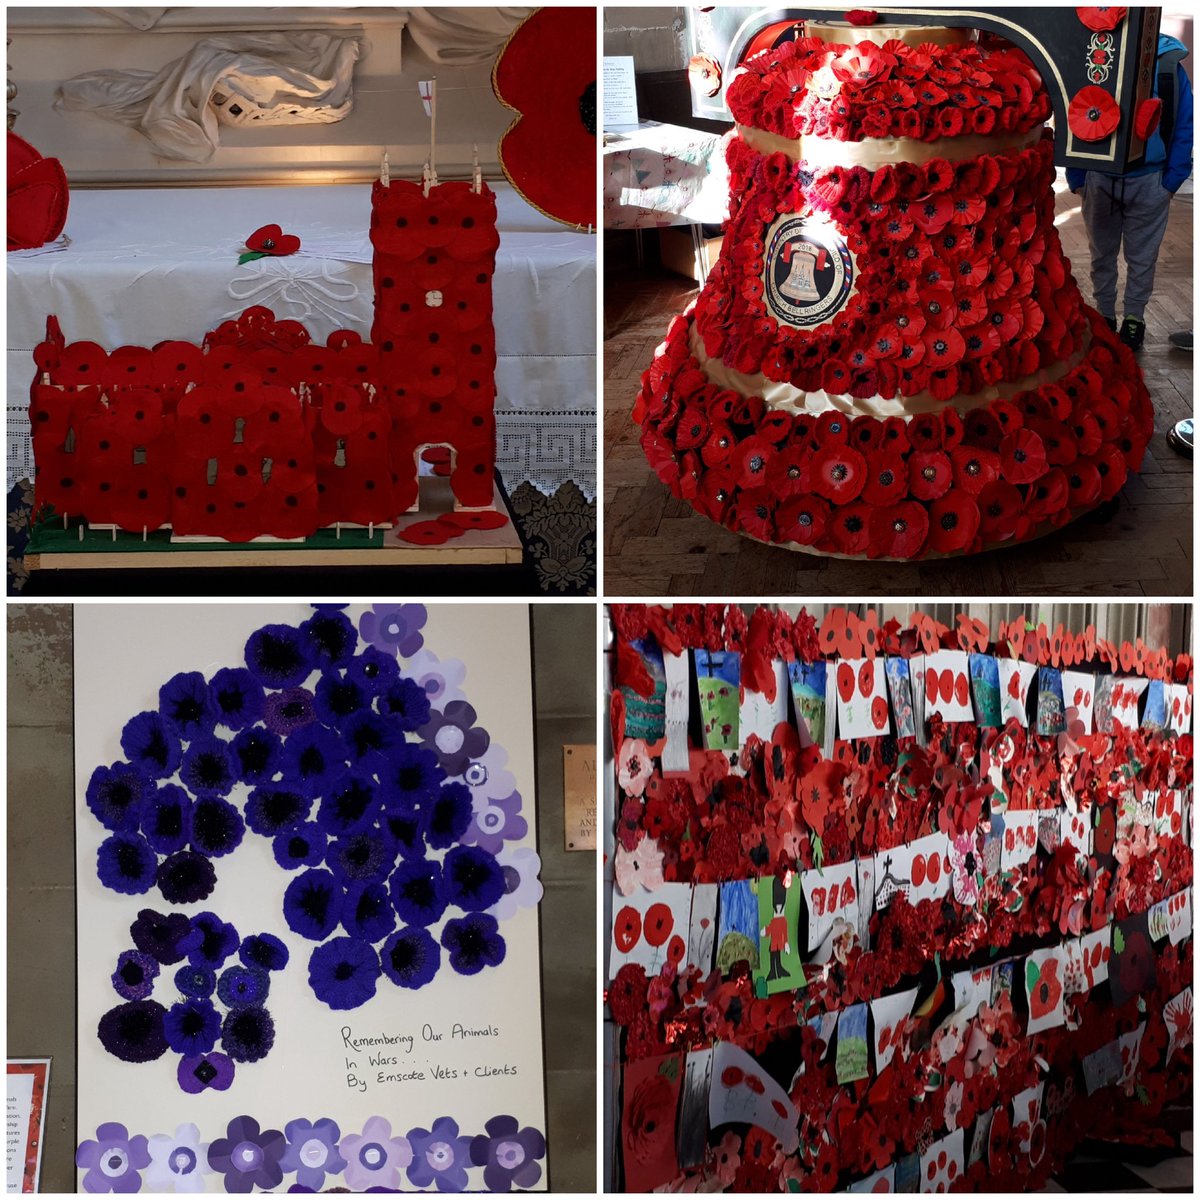 Display of 62,438 individual @WarwickPoppies in St Mary's Church, Warwick is on until December 9th. Members of CPTWI contributed flowers to @WarwickshireWI exhibit at the high altar and blocks to the quilt @QuiltersDen along with contributions from every corner of the county.